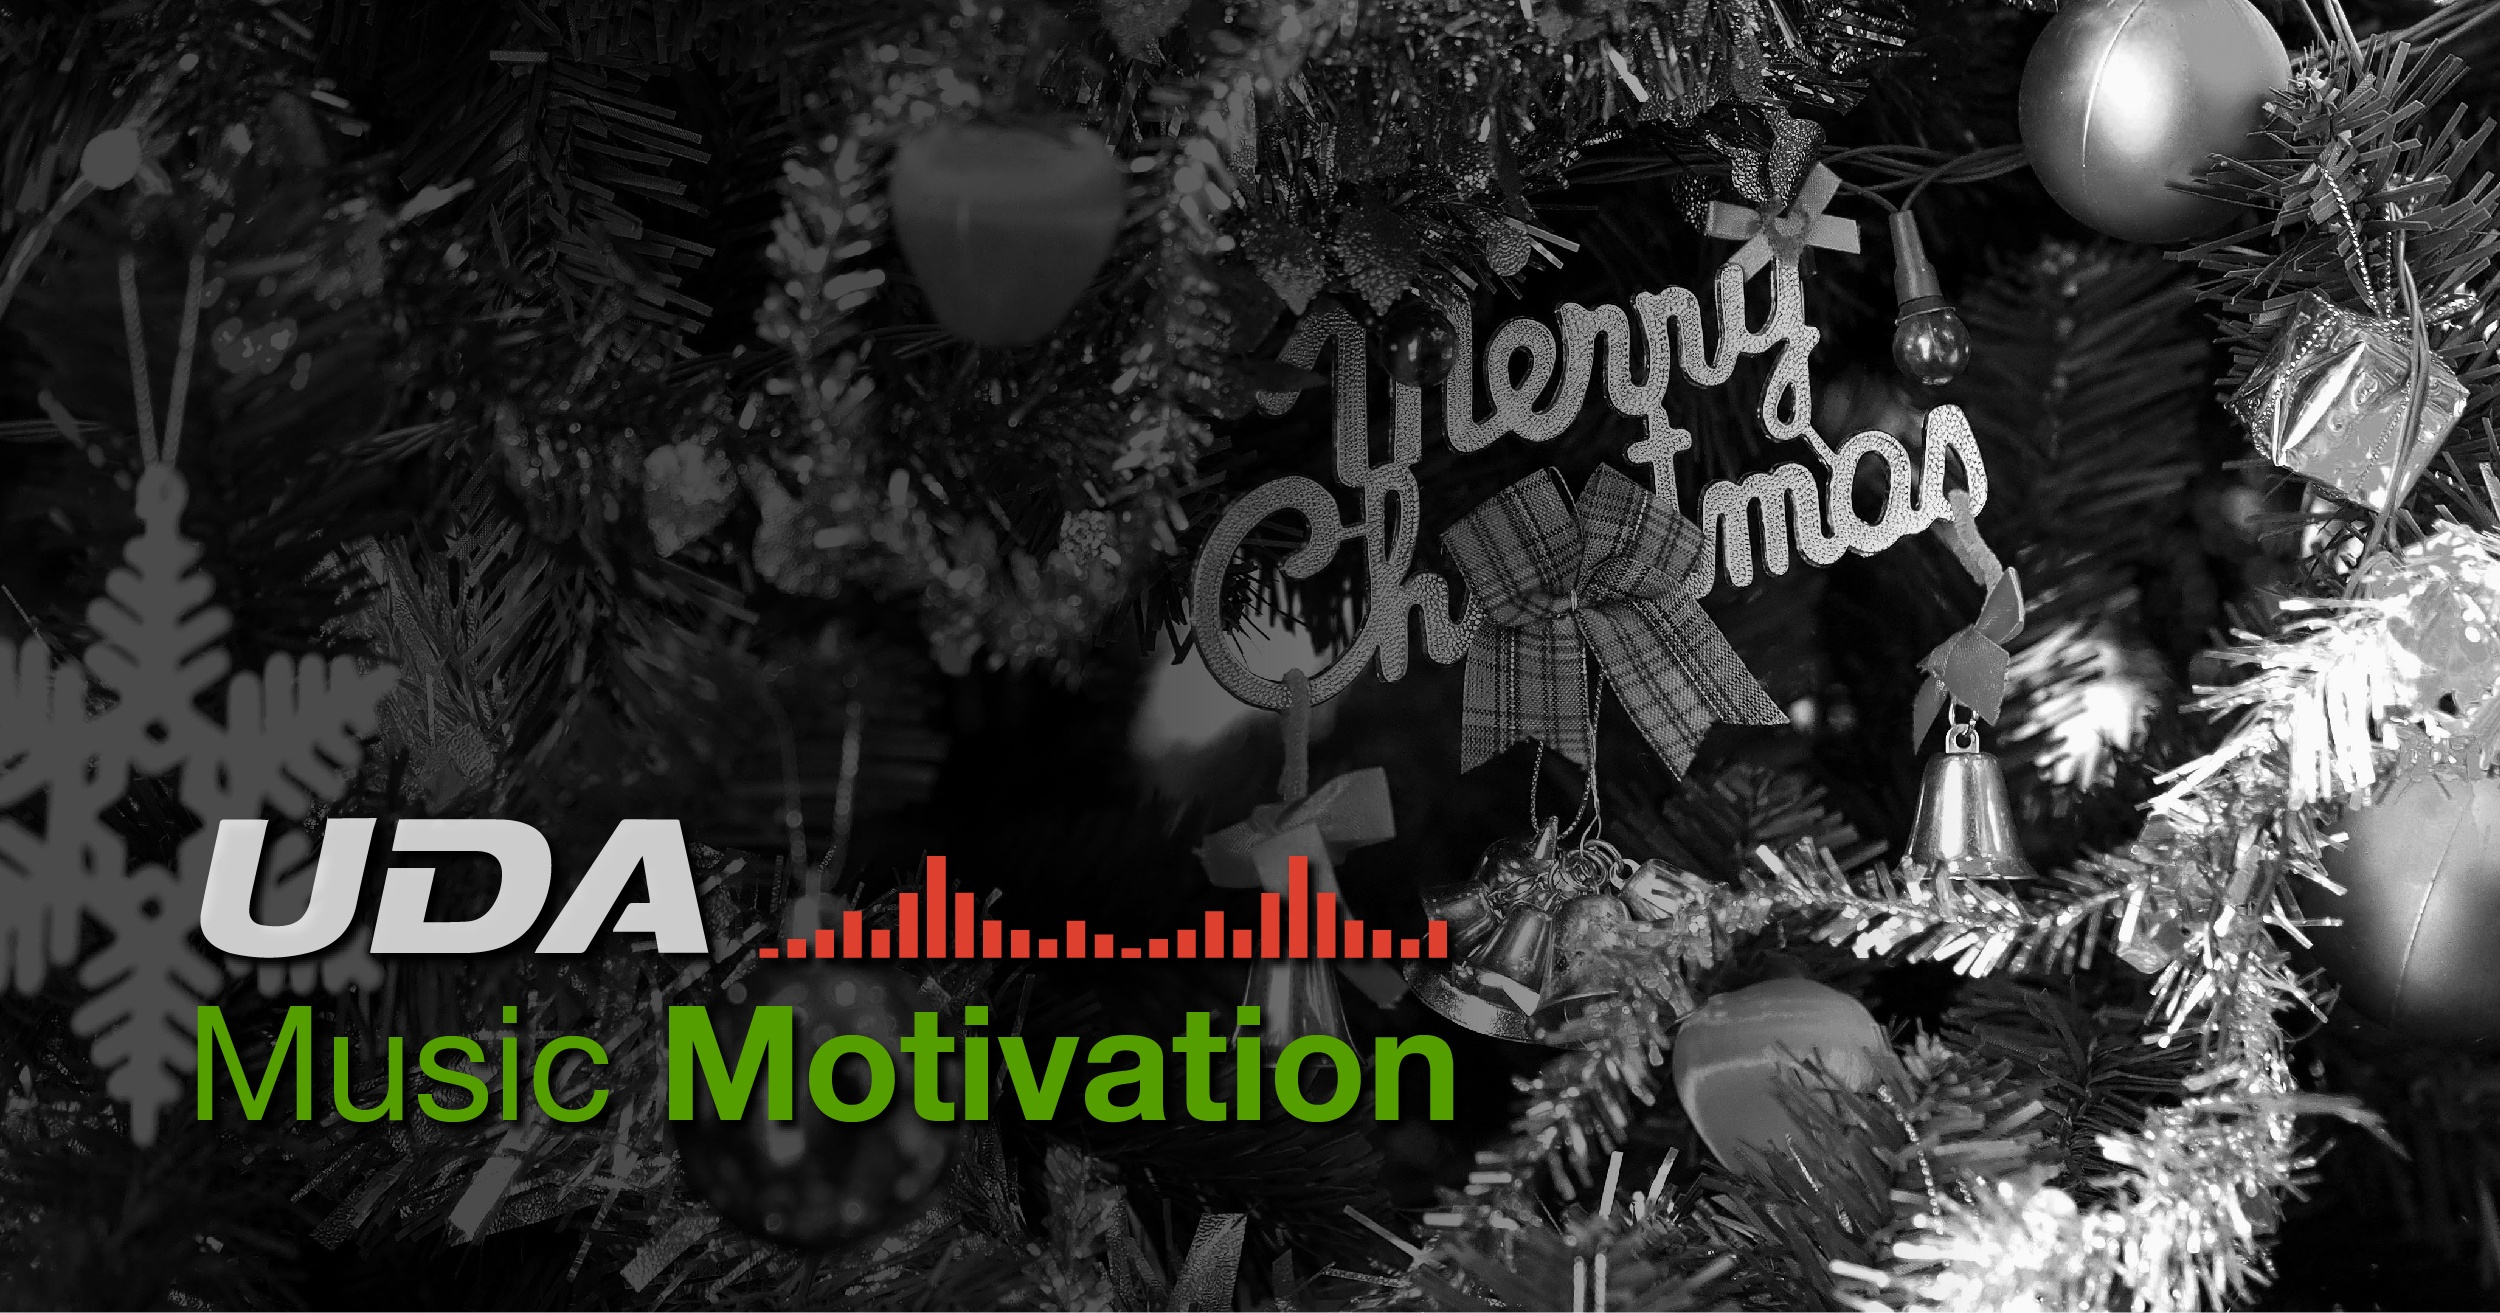 Music Motivation: Office Christmas Party